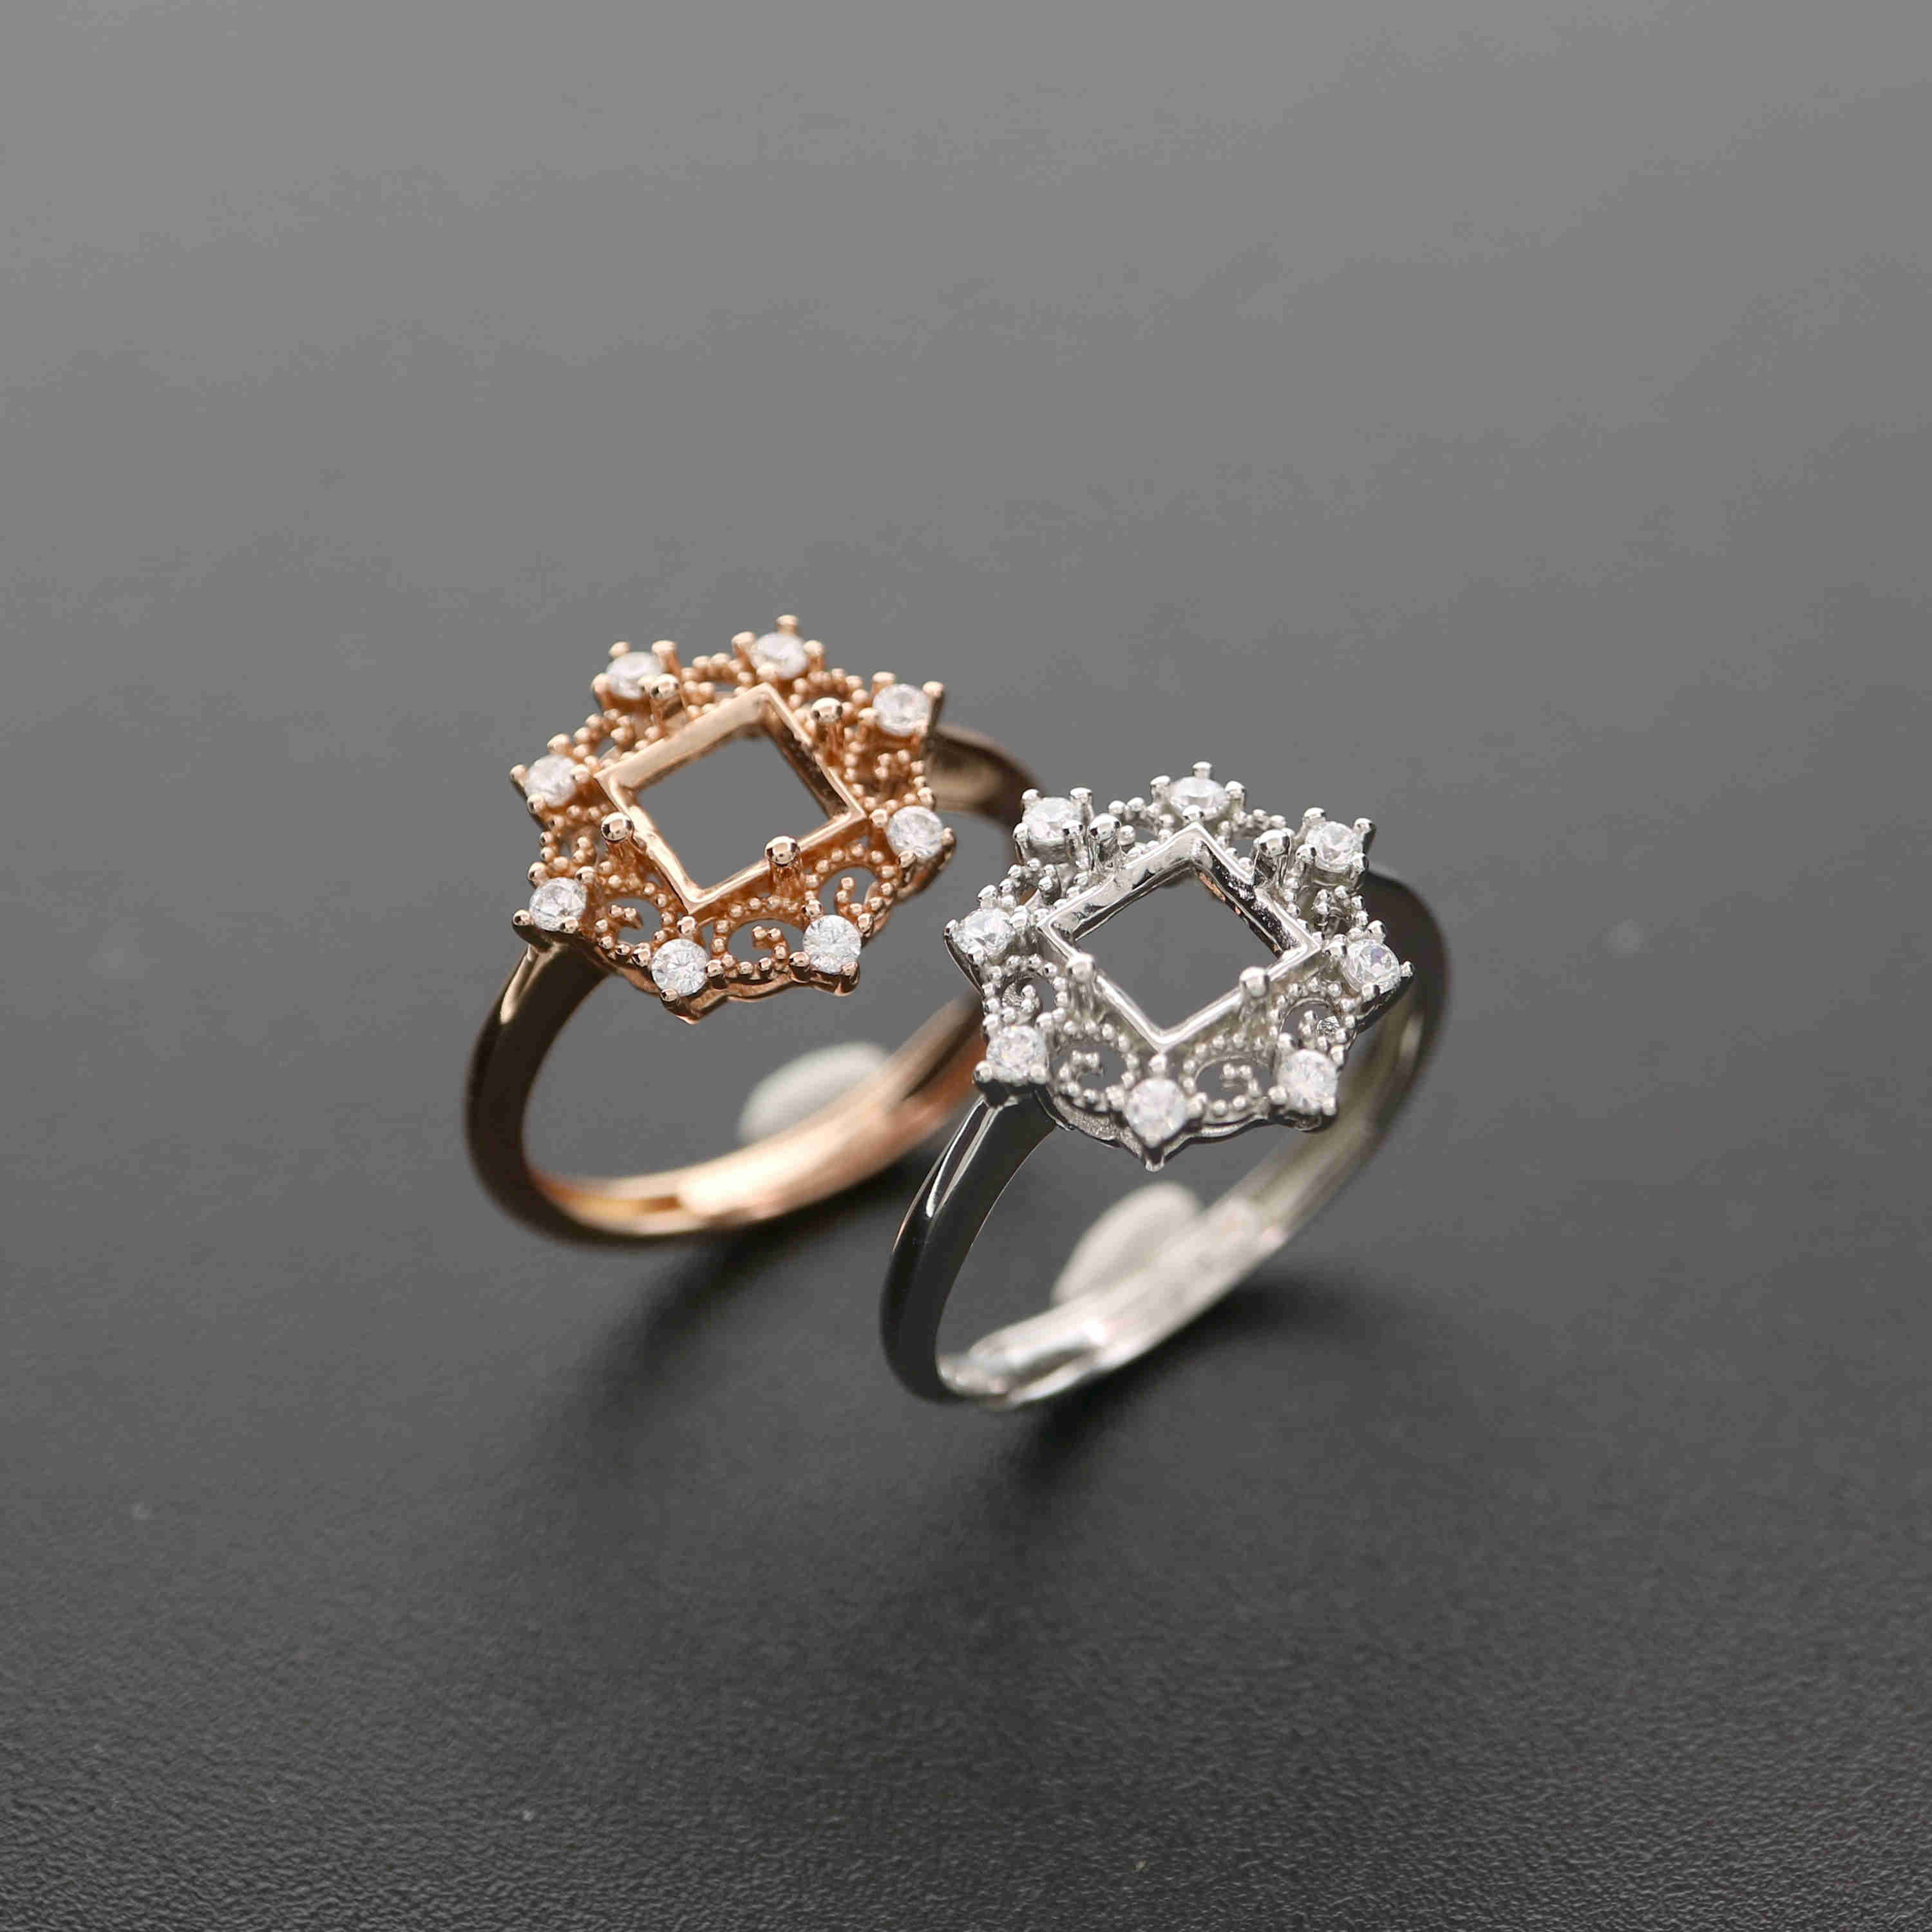 1Pcs 3-6MM Square Lace Rose Gold Silver Gems Cz Stone Prong Bezel Solid 925 Sterling Silver Adjustable Ring Settings 1294129 - Click Image to Close